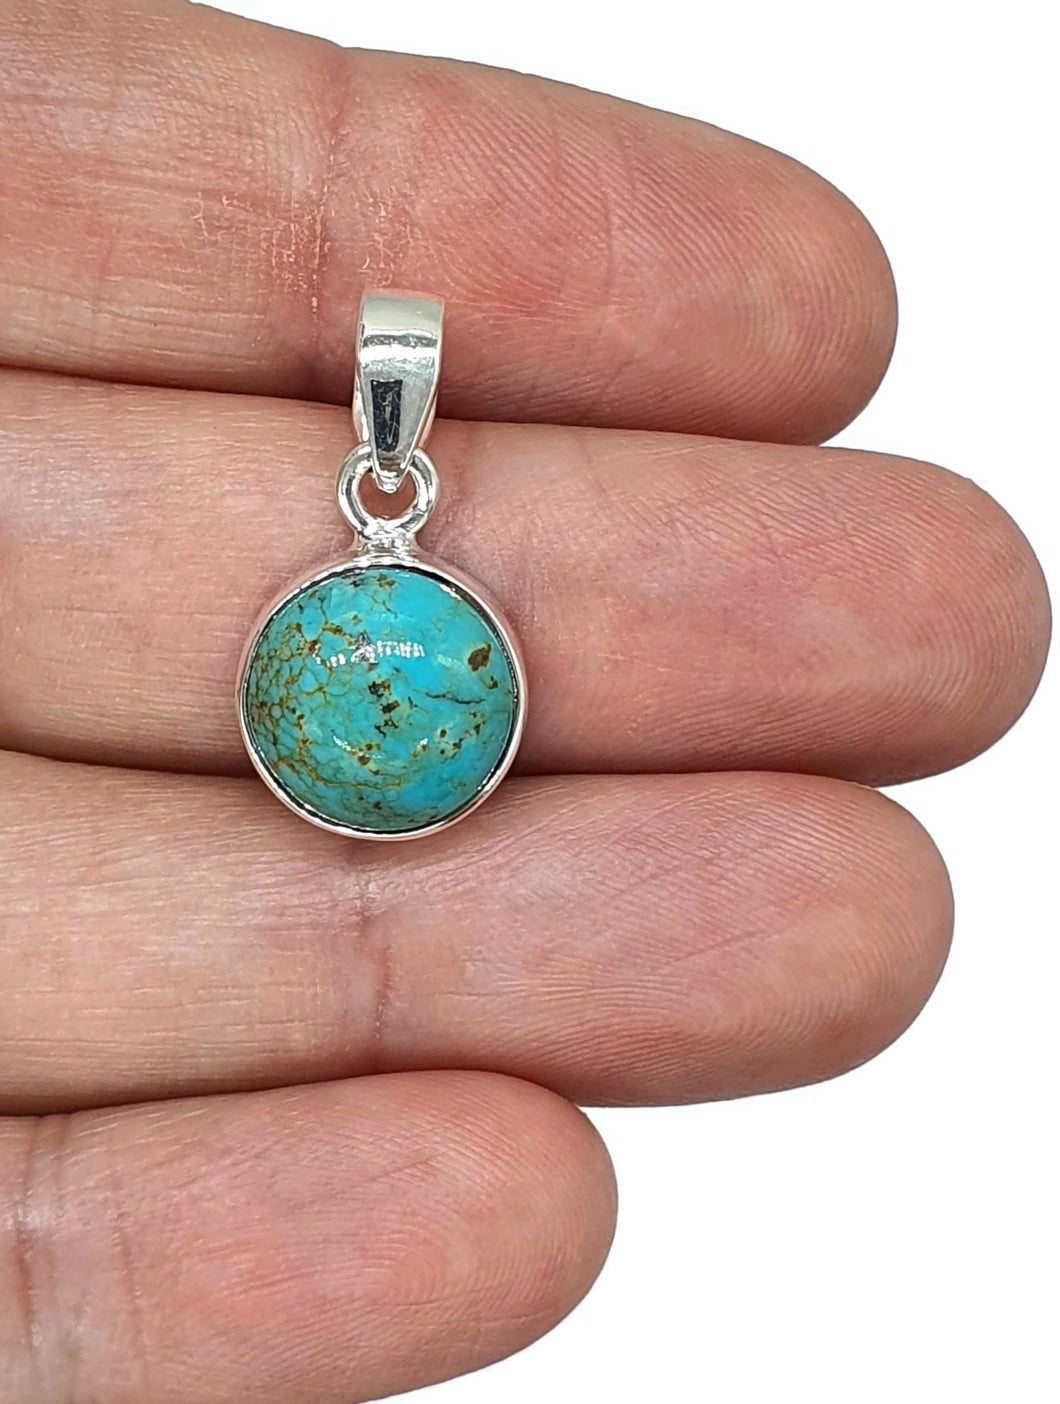 Round Turquoise Pendant, Sterling Silver, December Birthstone, Blue Turquoise, Protection - GemzAustralia 